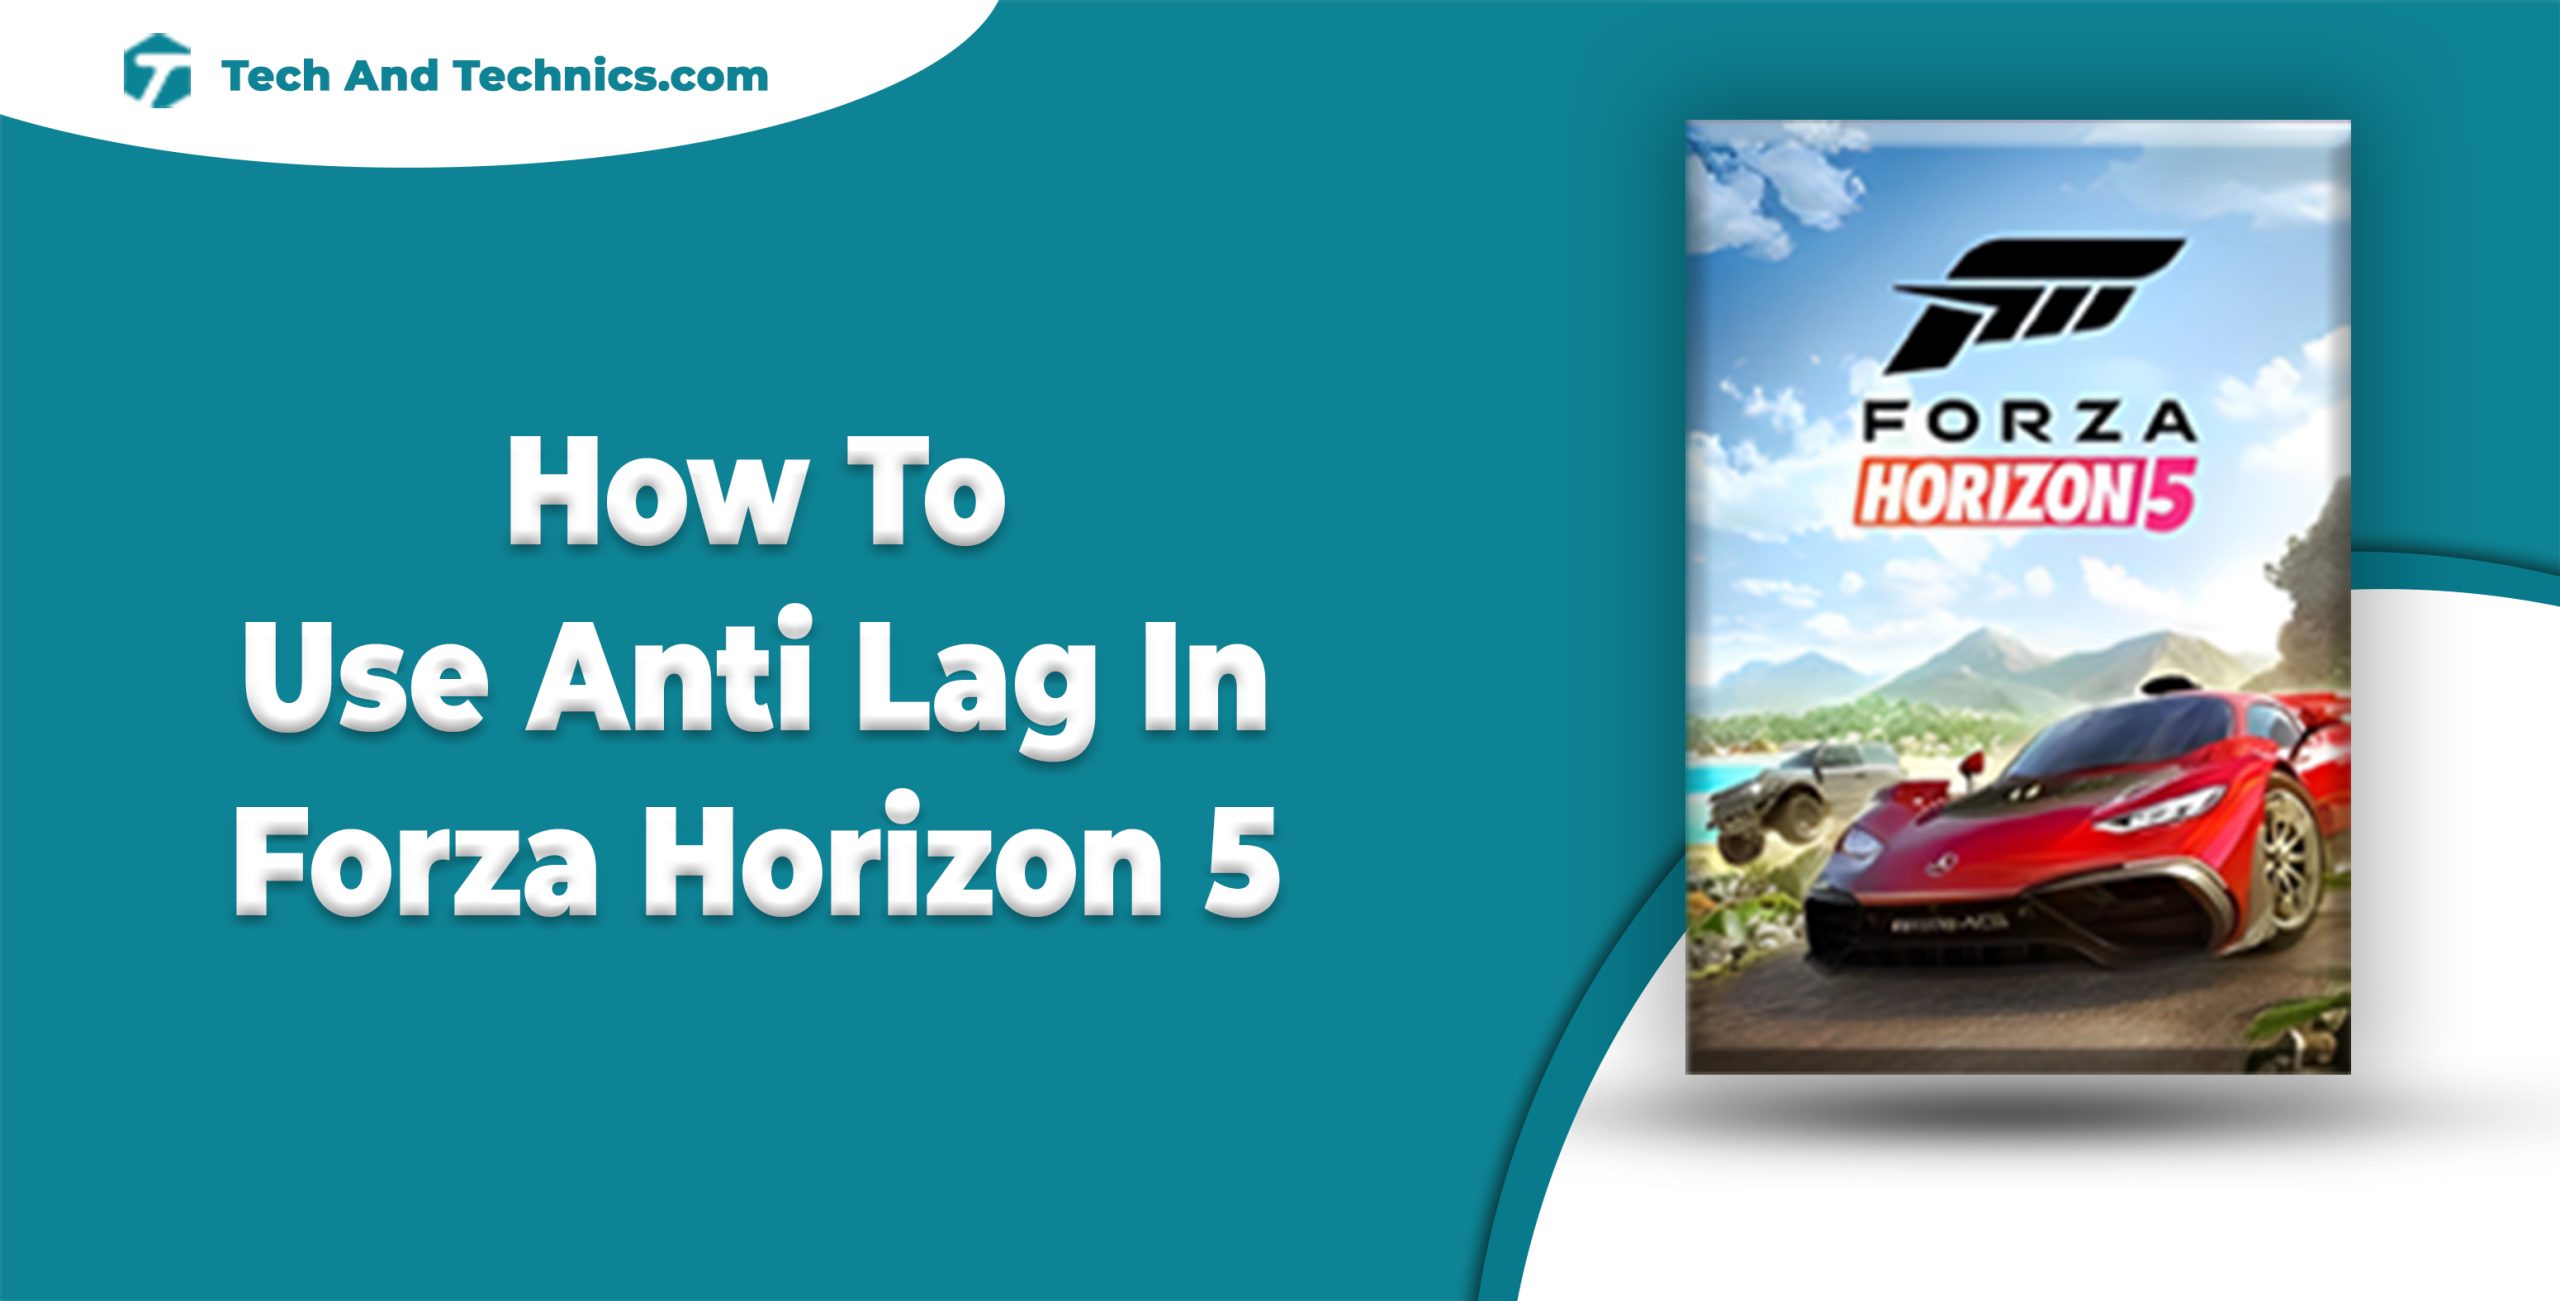 How To Use Anti Lag In Forza Horizon 5 (Complete Guide)